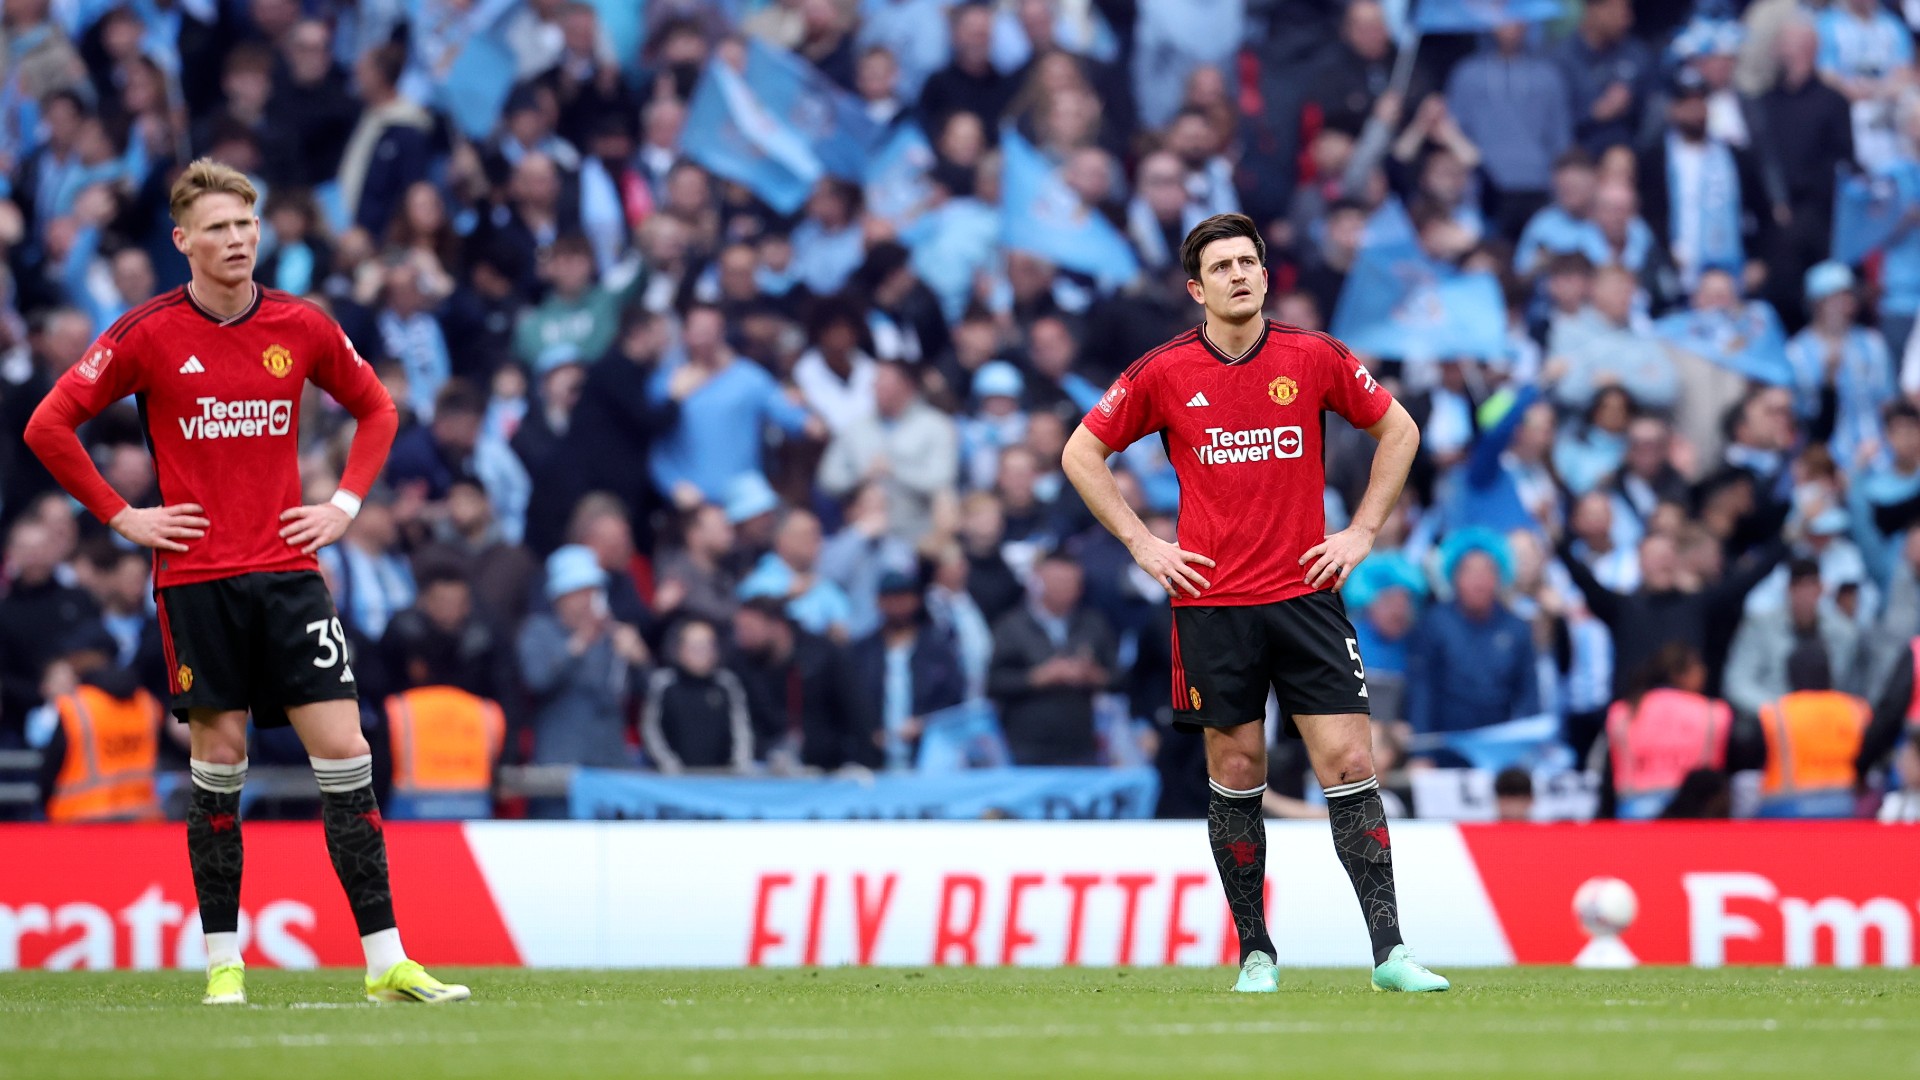 Maguire: Changes needed at Man Utd